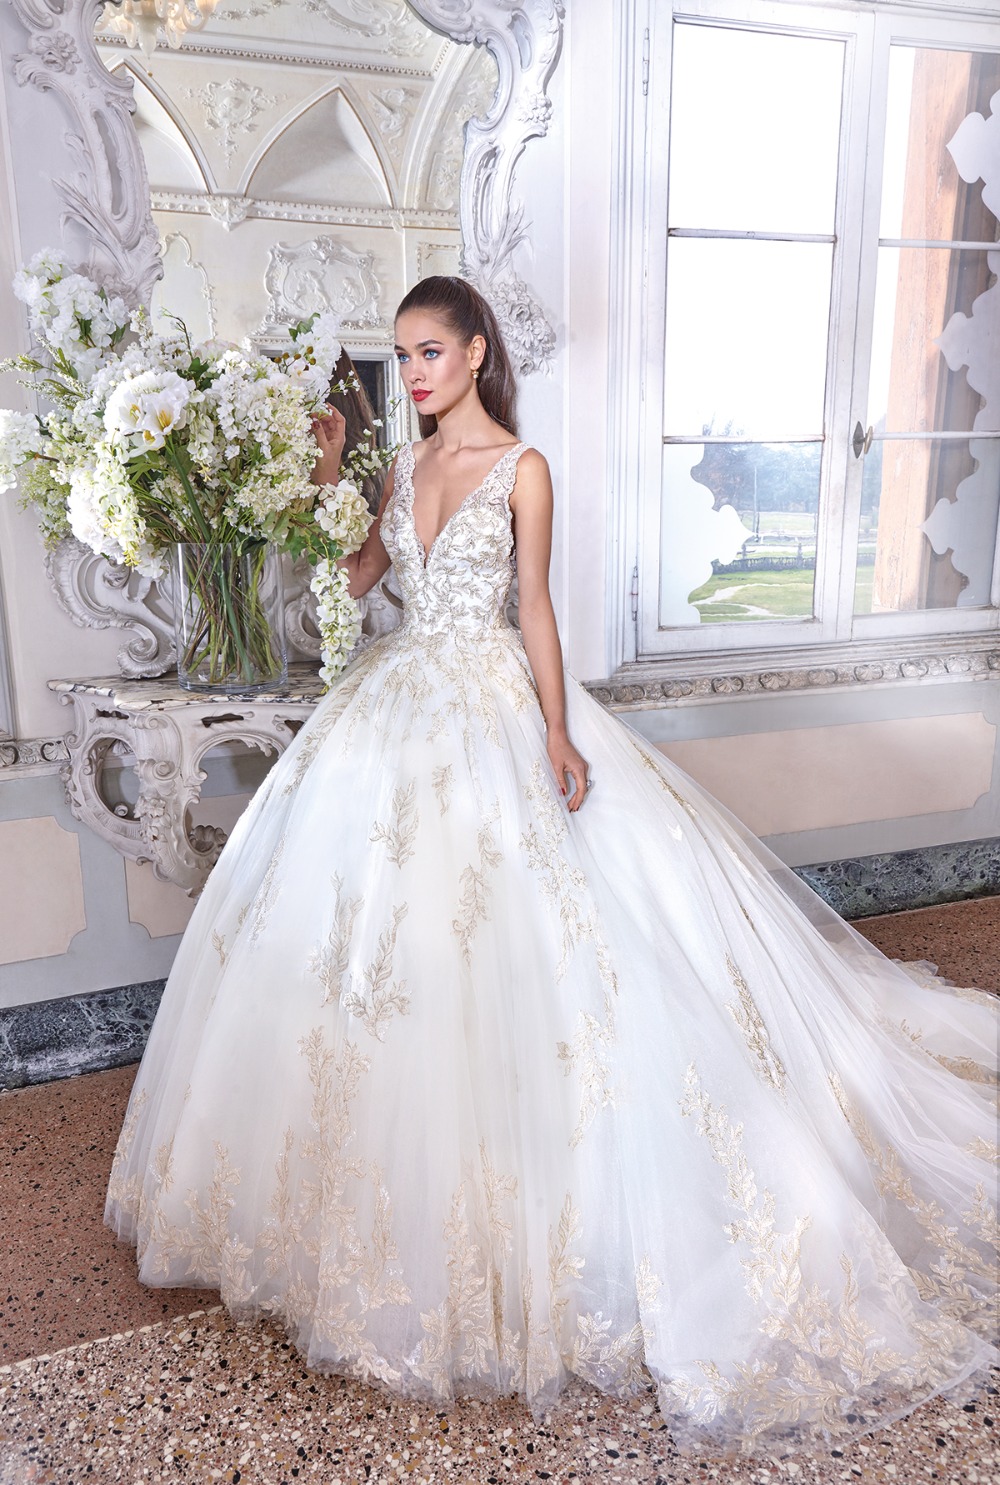 gold and tulle princess gown by Demetrios Platinum 19